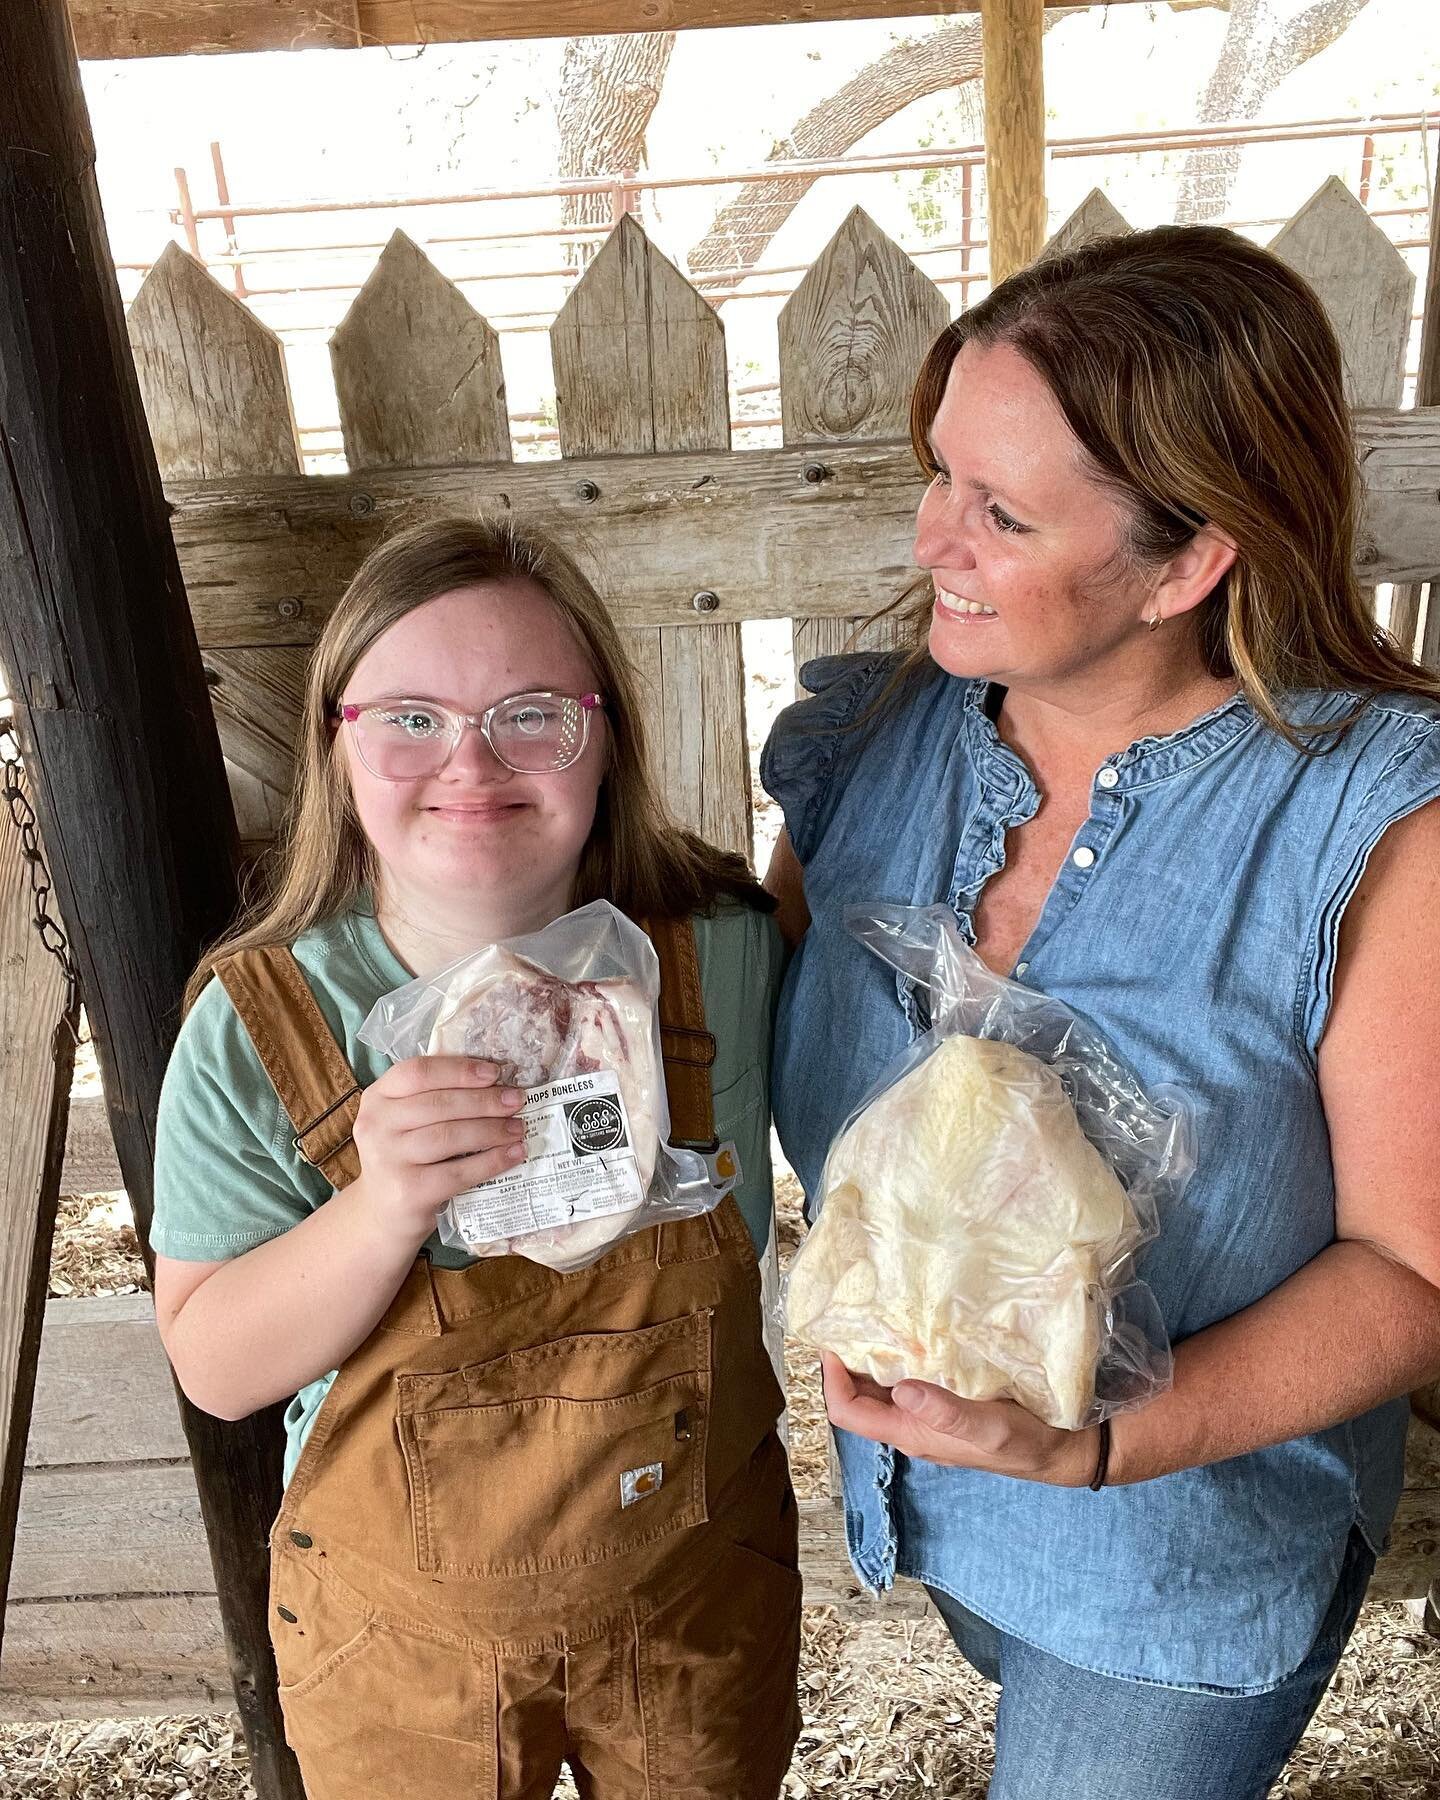 Here we are&mdash;2 girls in the barn getting ready for a big weekend of deliveries and a new farmers market. In this 100+ degrees temps, we cool off by holding frozen chicken and pork. 
1. Delivery on Saturday&mdash;order online. JC, Marble Falls, A